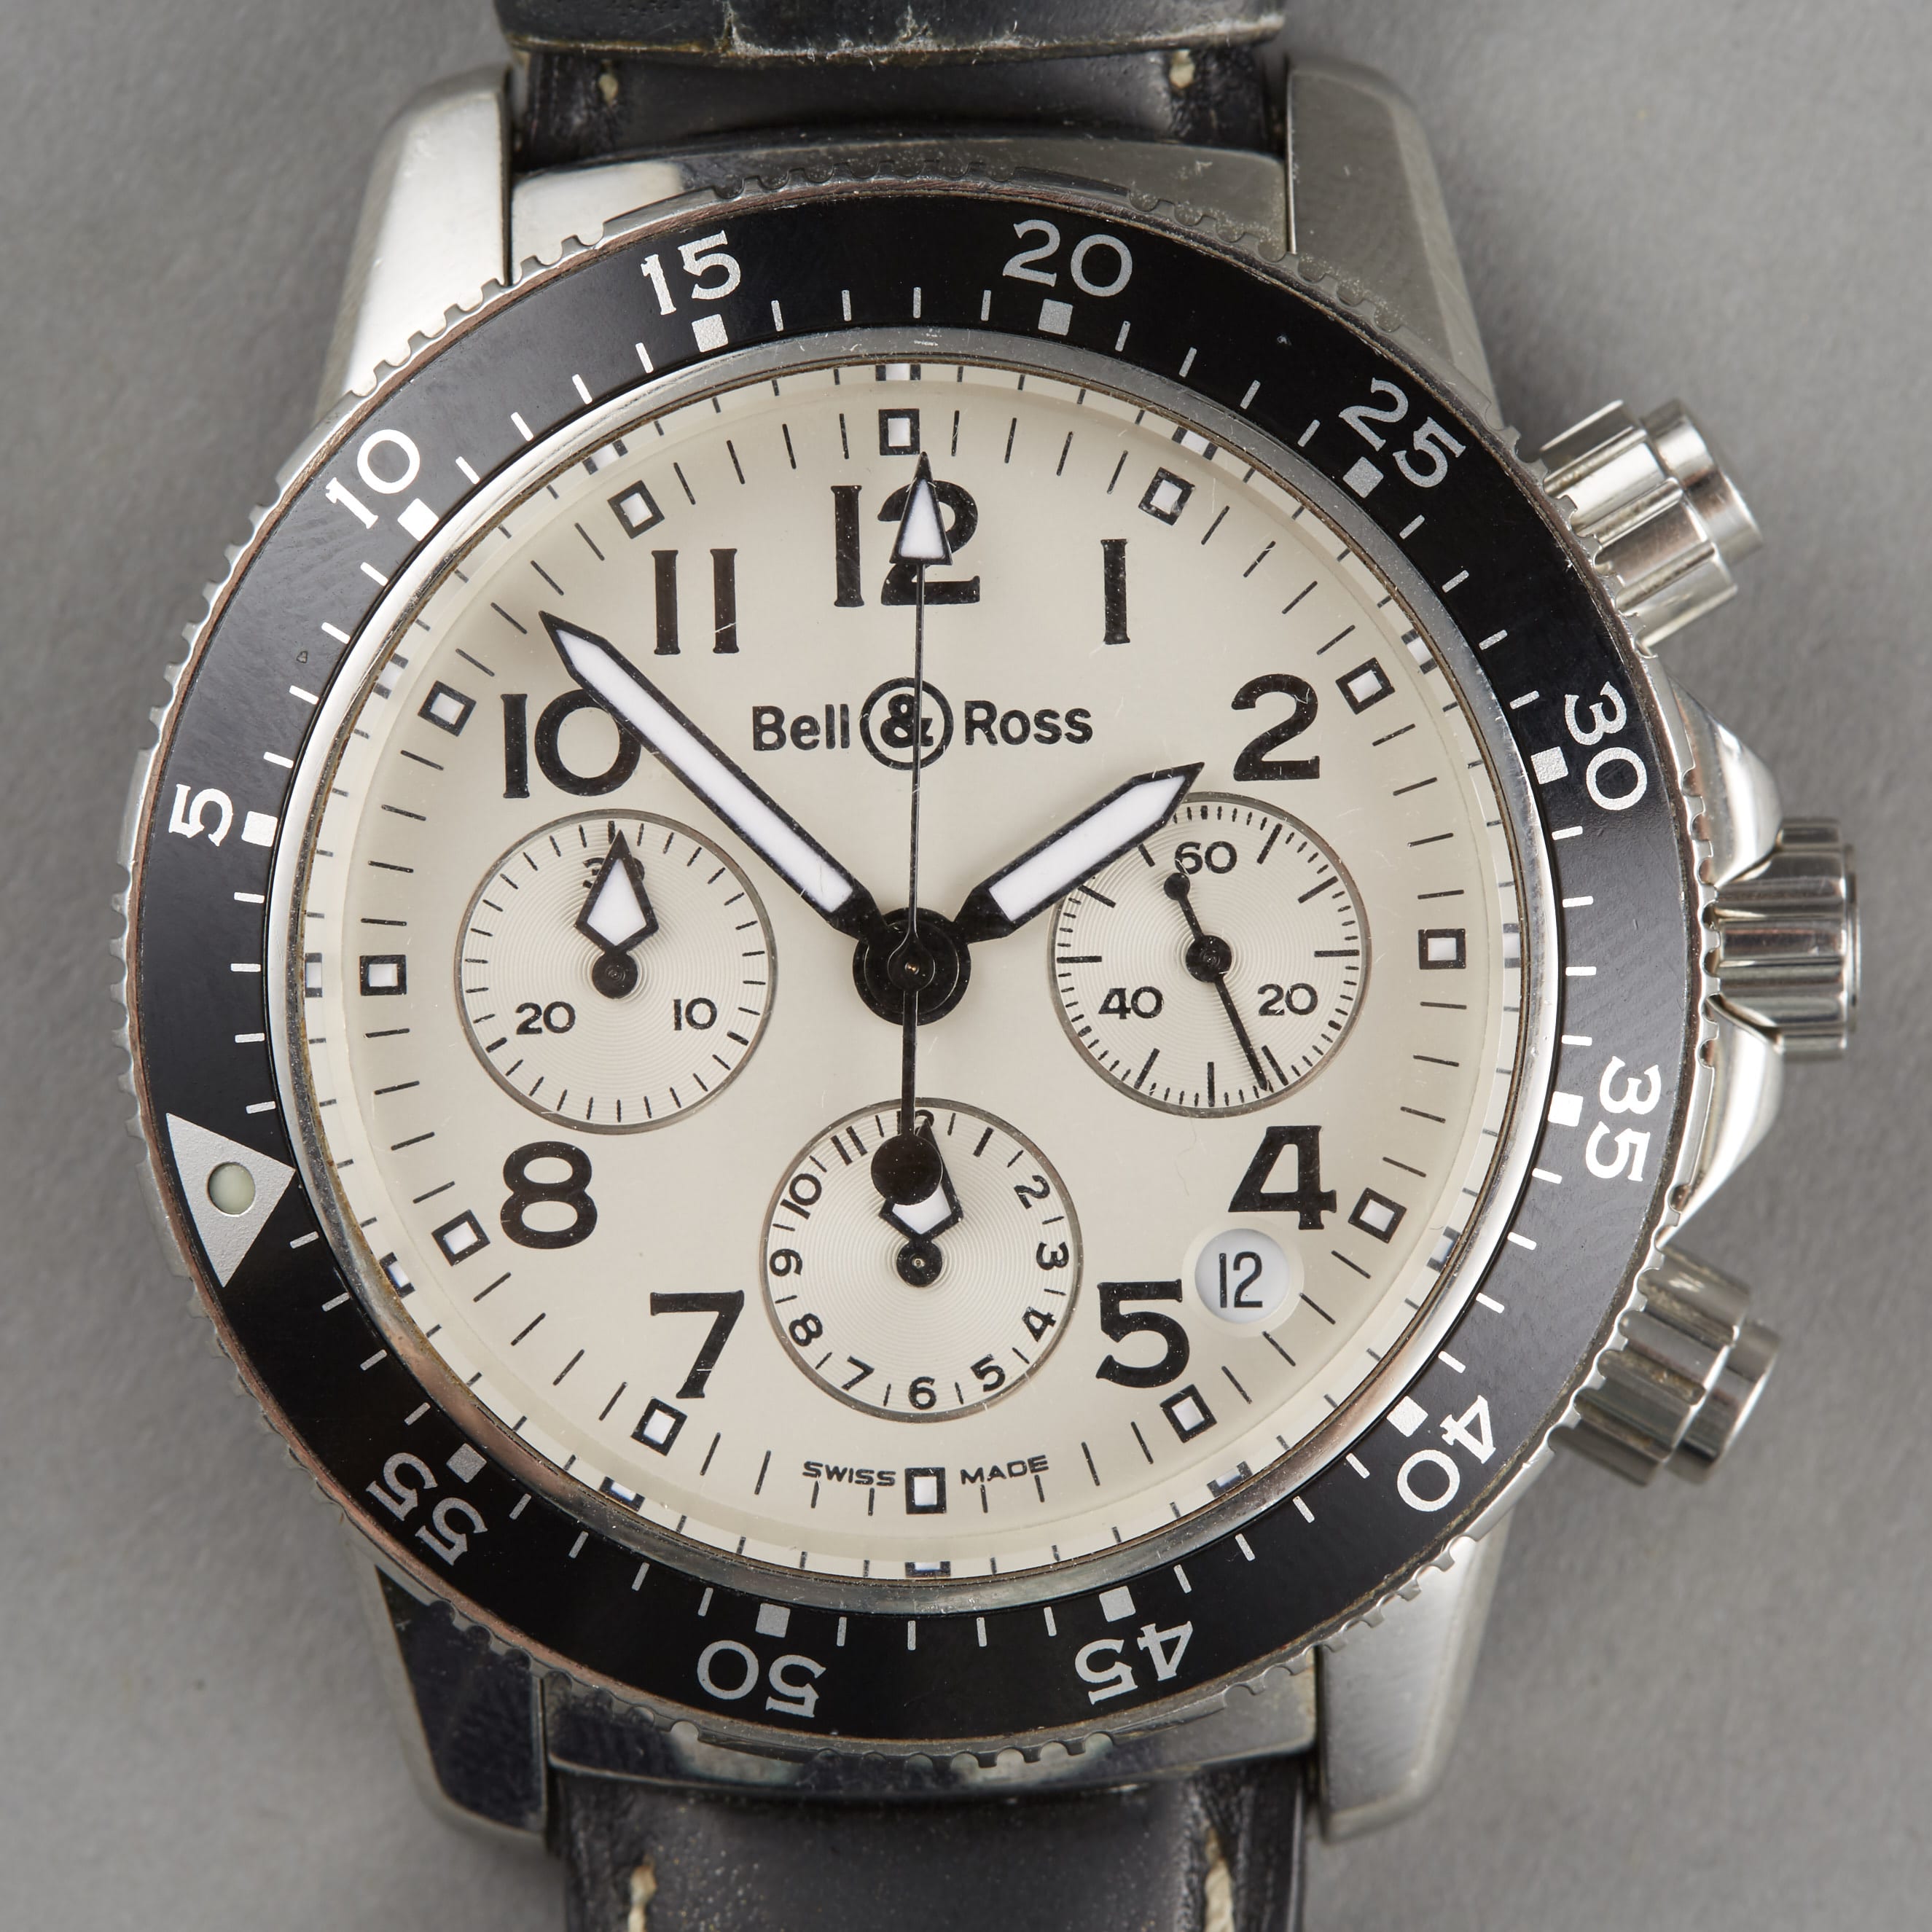 Lot 163: Bell and Ross watch